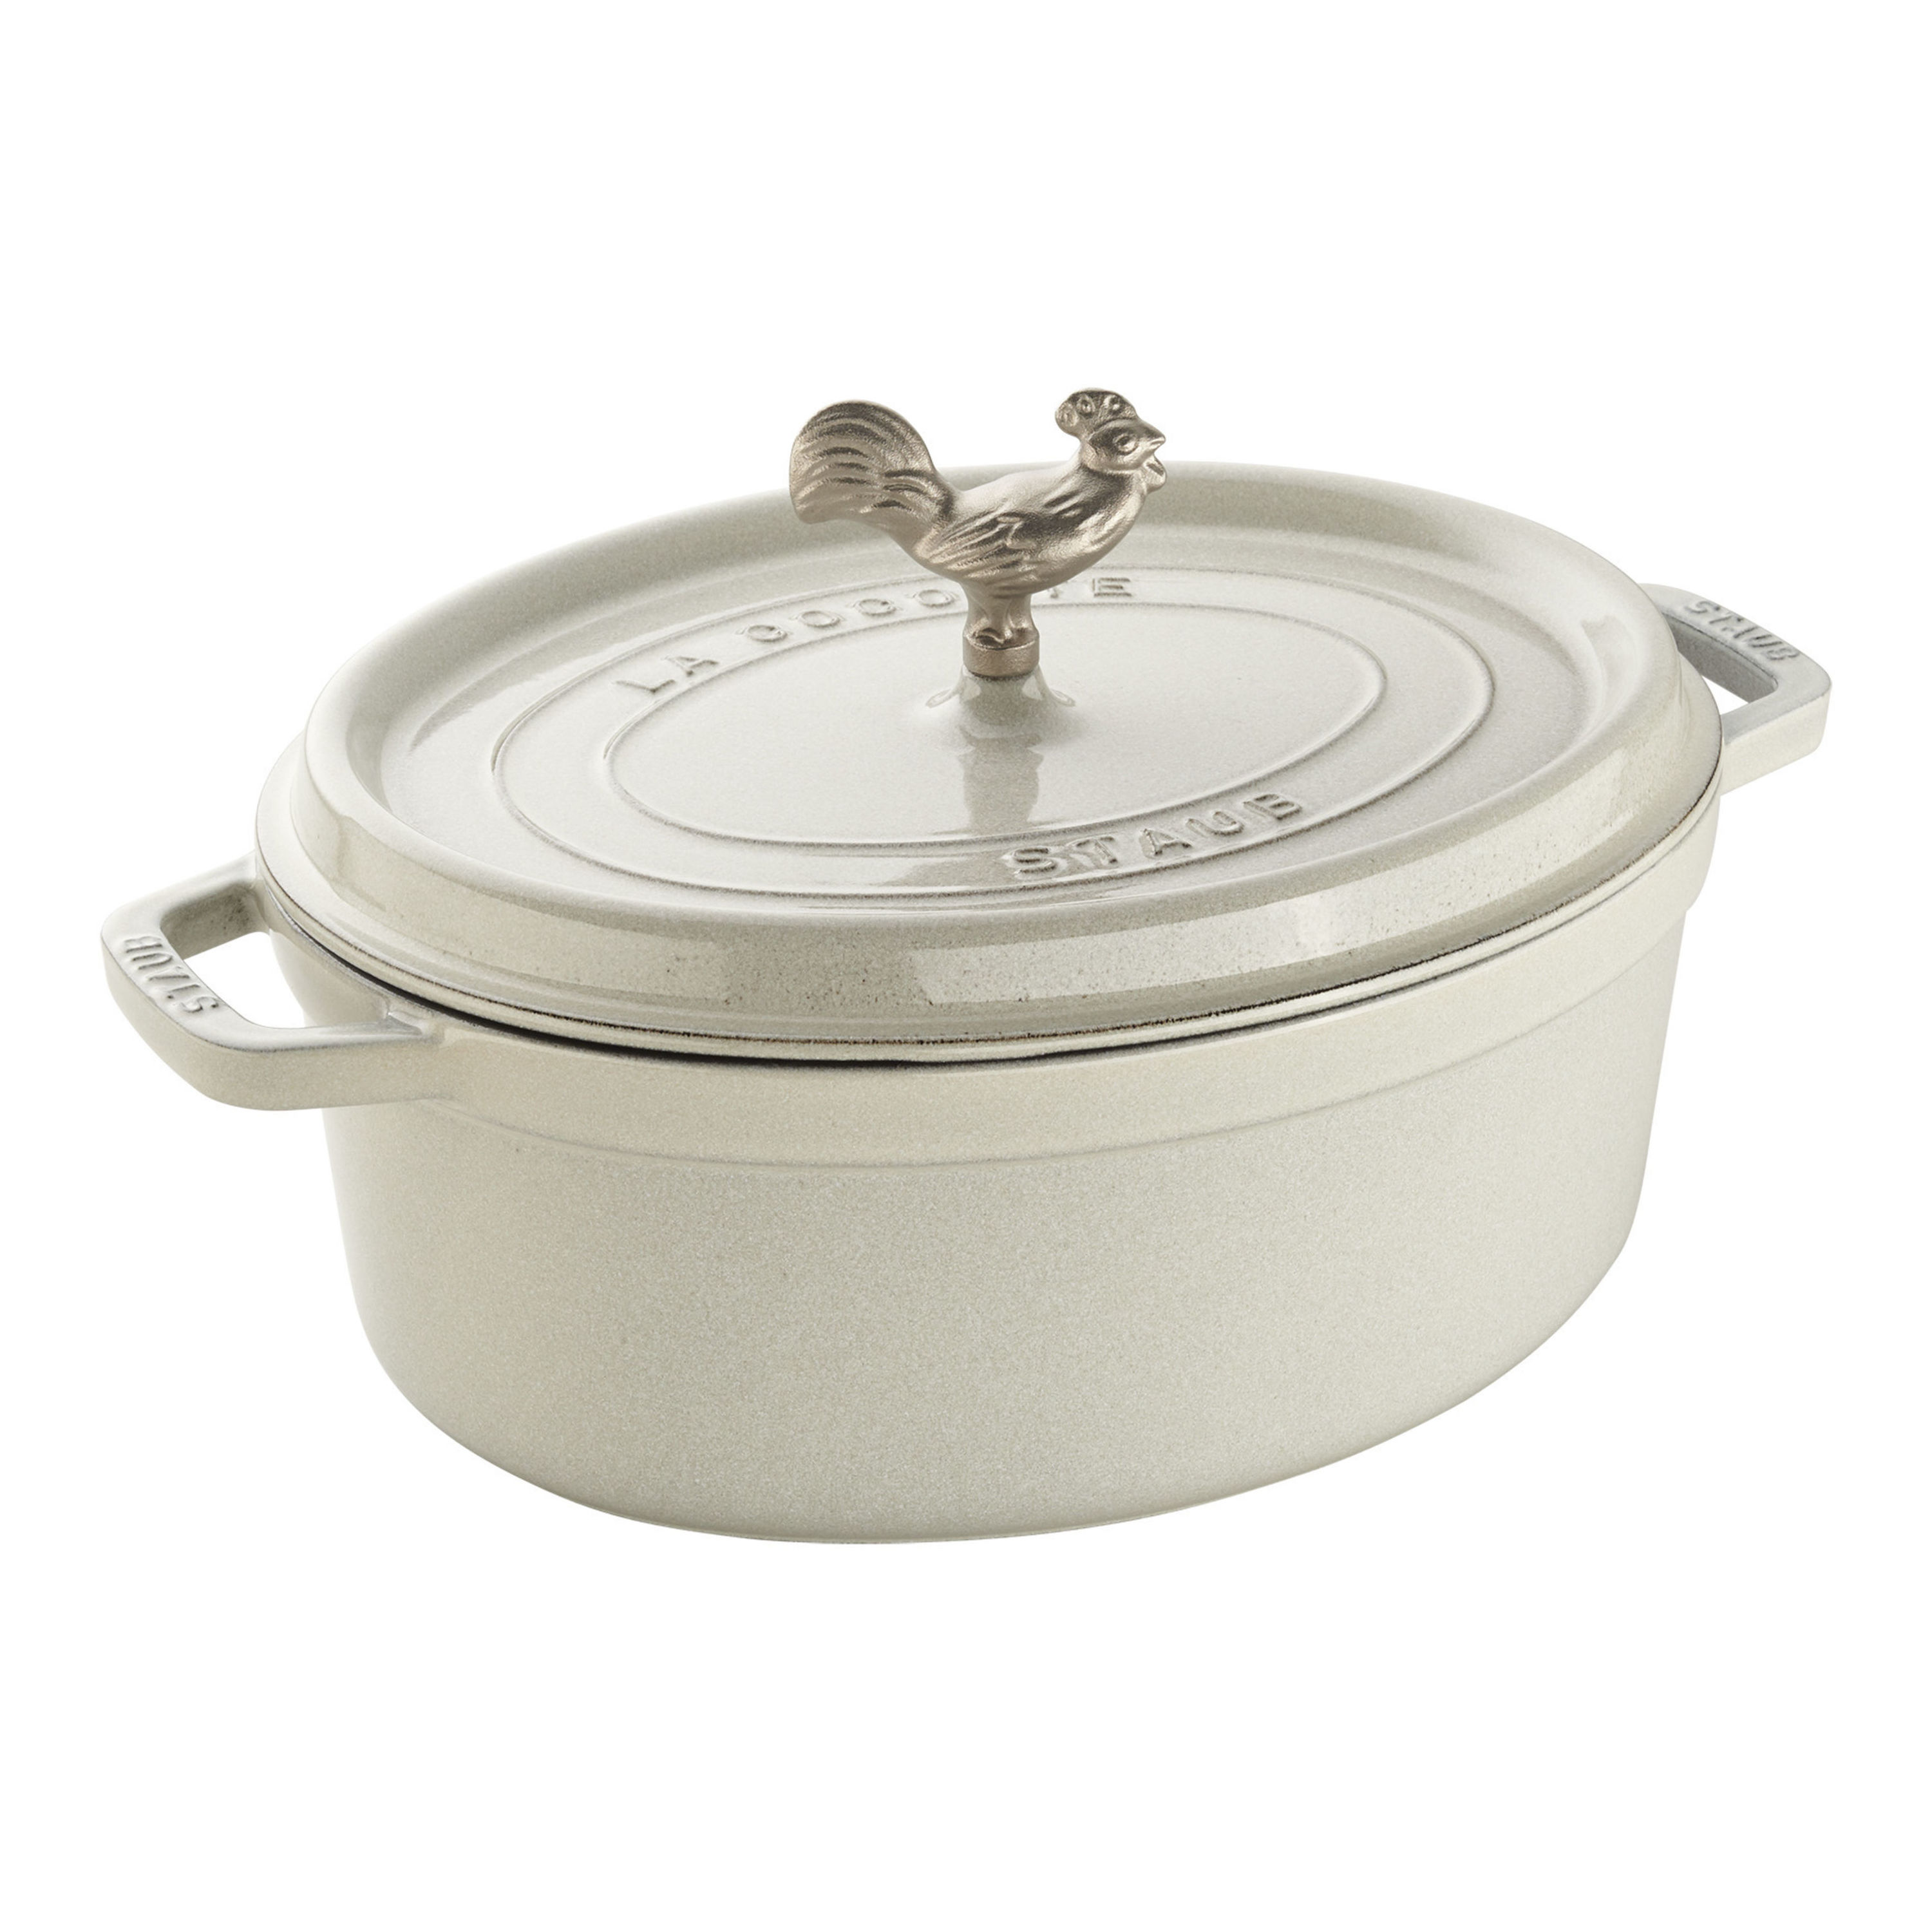 Staub Cast Iron Dutch Oven 5-qt Tall Cocotte, Made in France, Serves 5-6